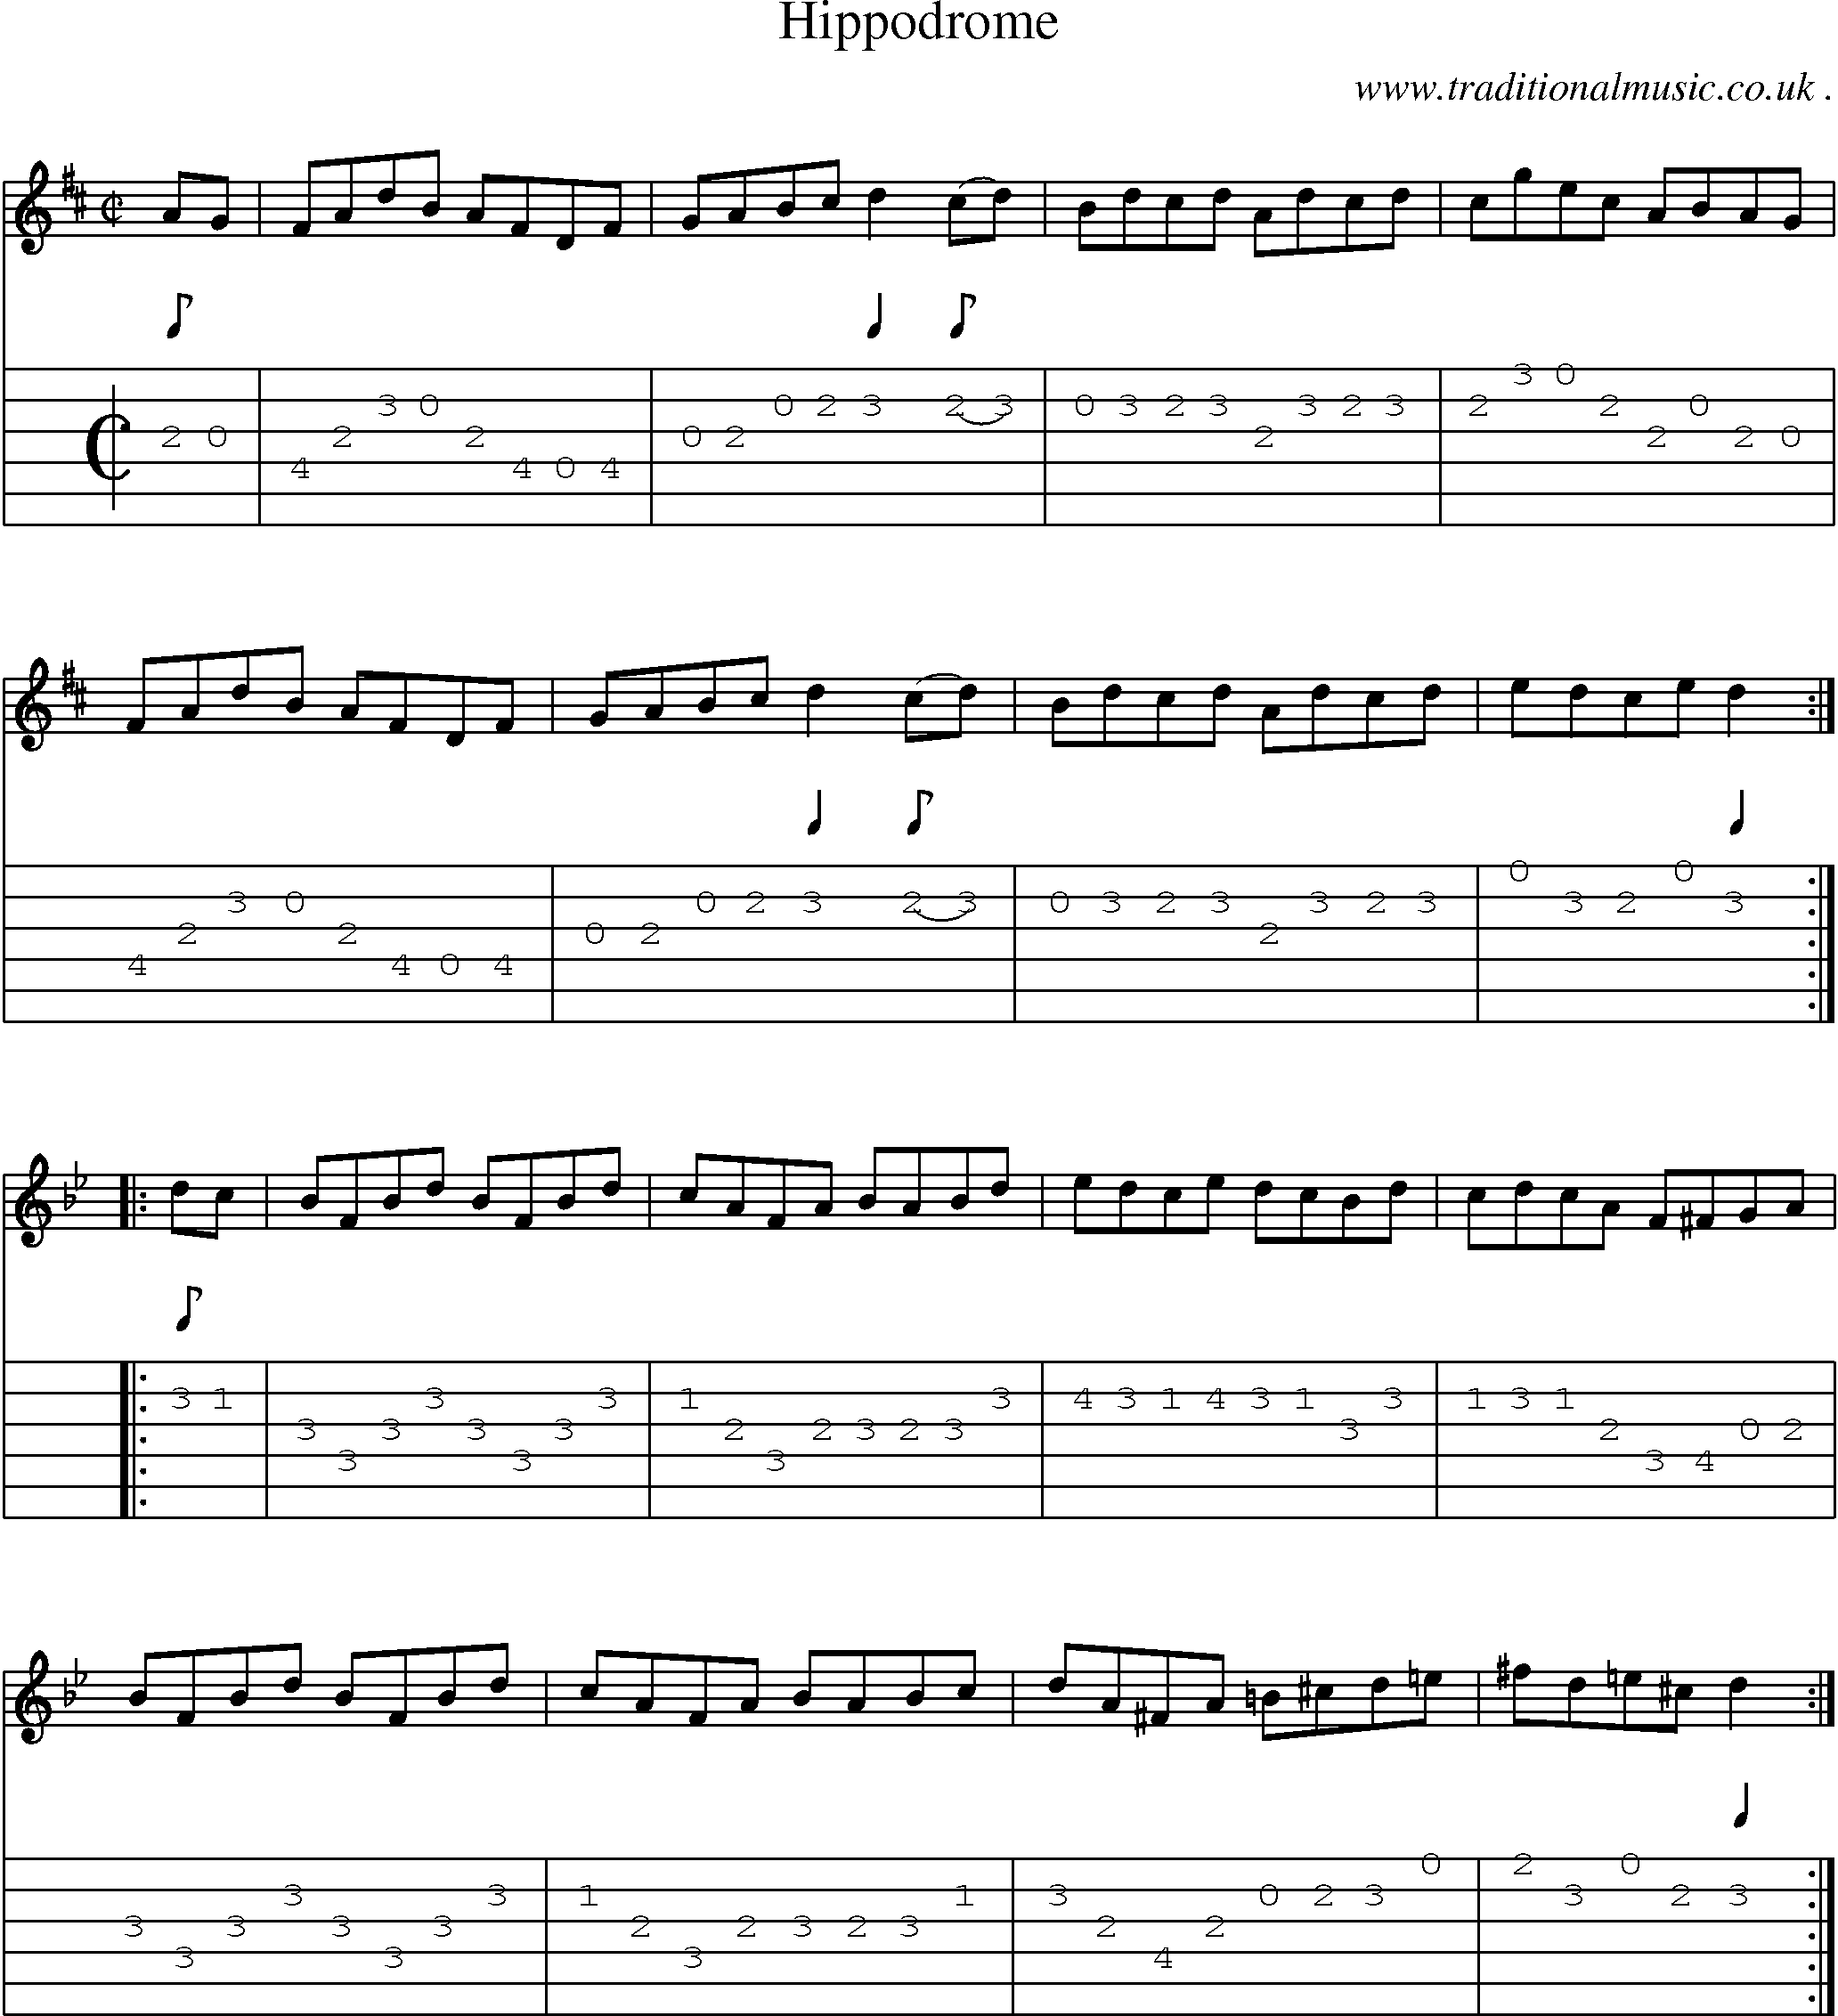 Sheet-Music and Guitar Tabs for Hippodrome